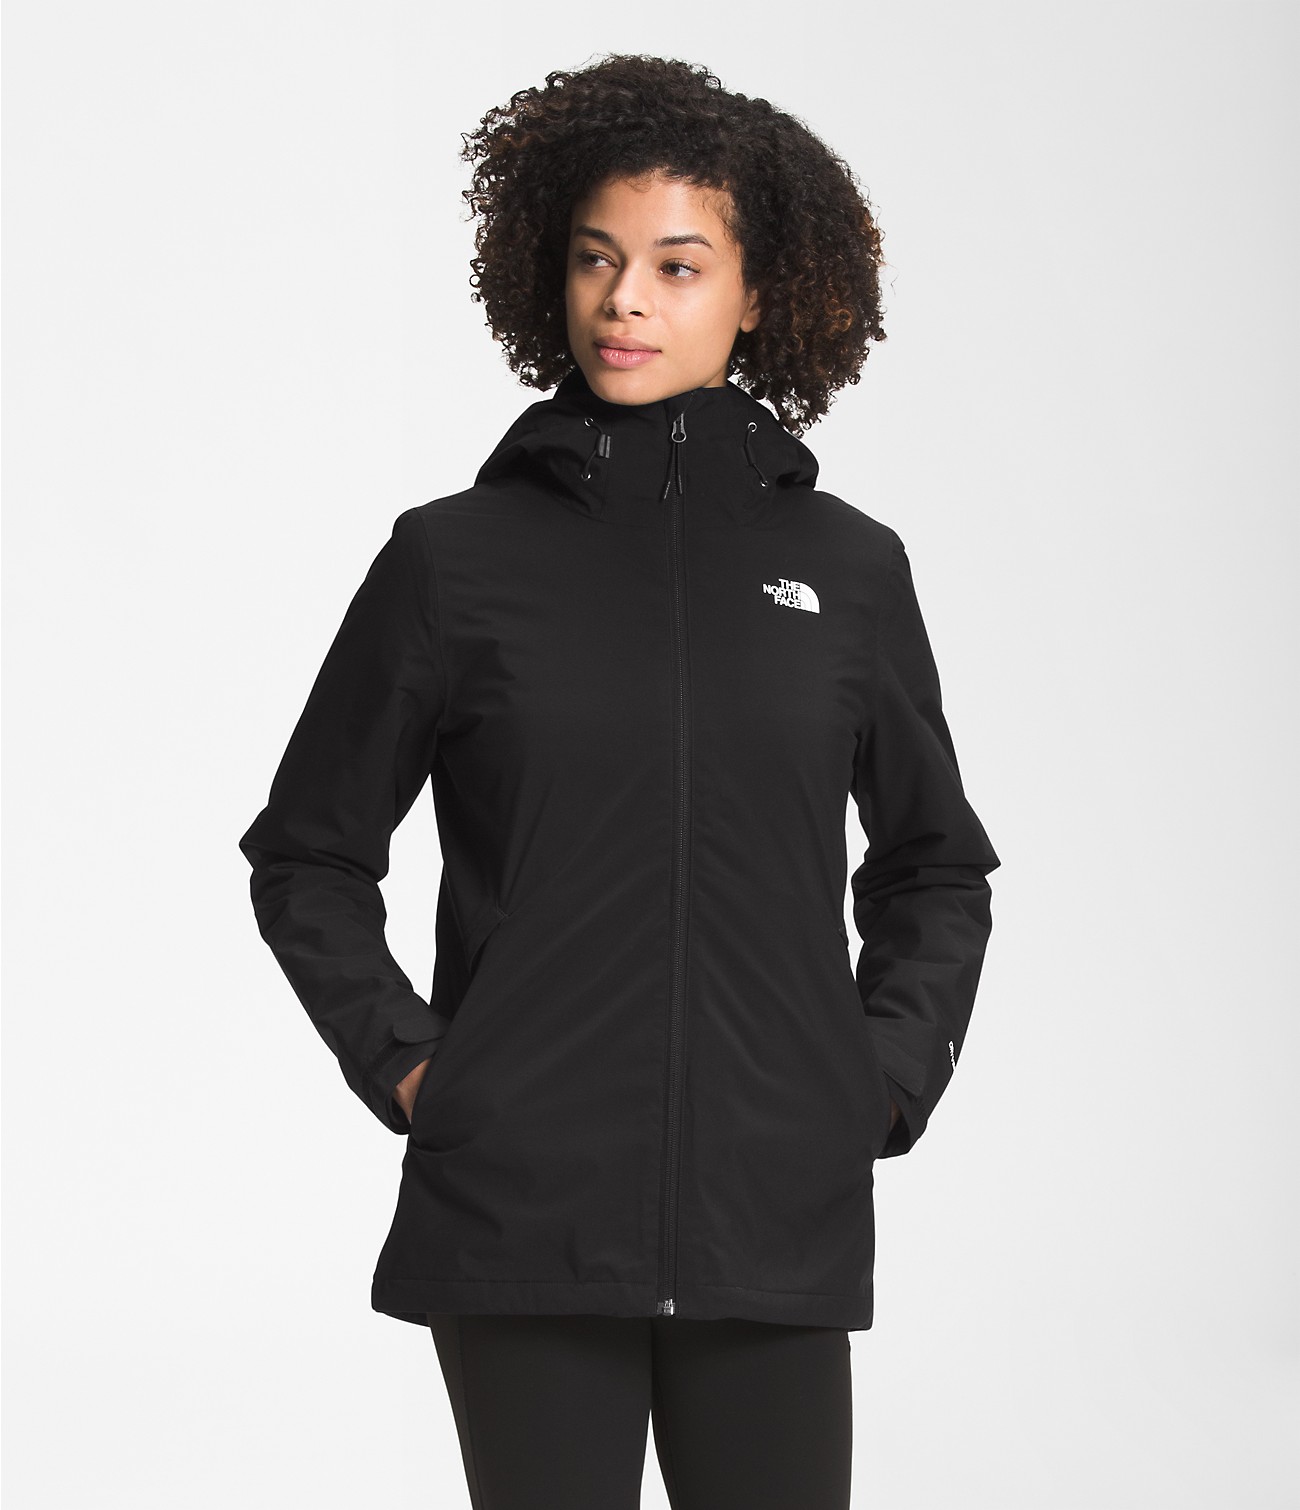 Unlock Wilderness' choice in the Superdry Vs North Face comparison, the Carto Triclimate® Jacket by The North Face